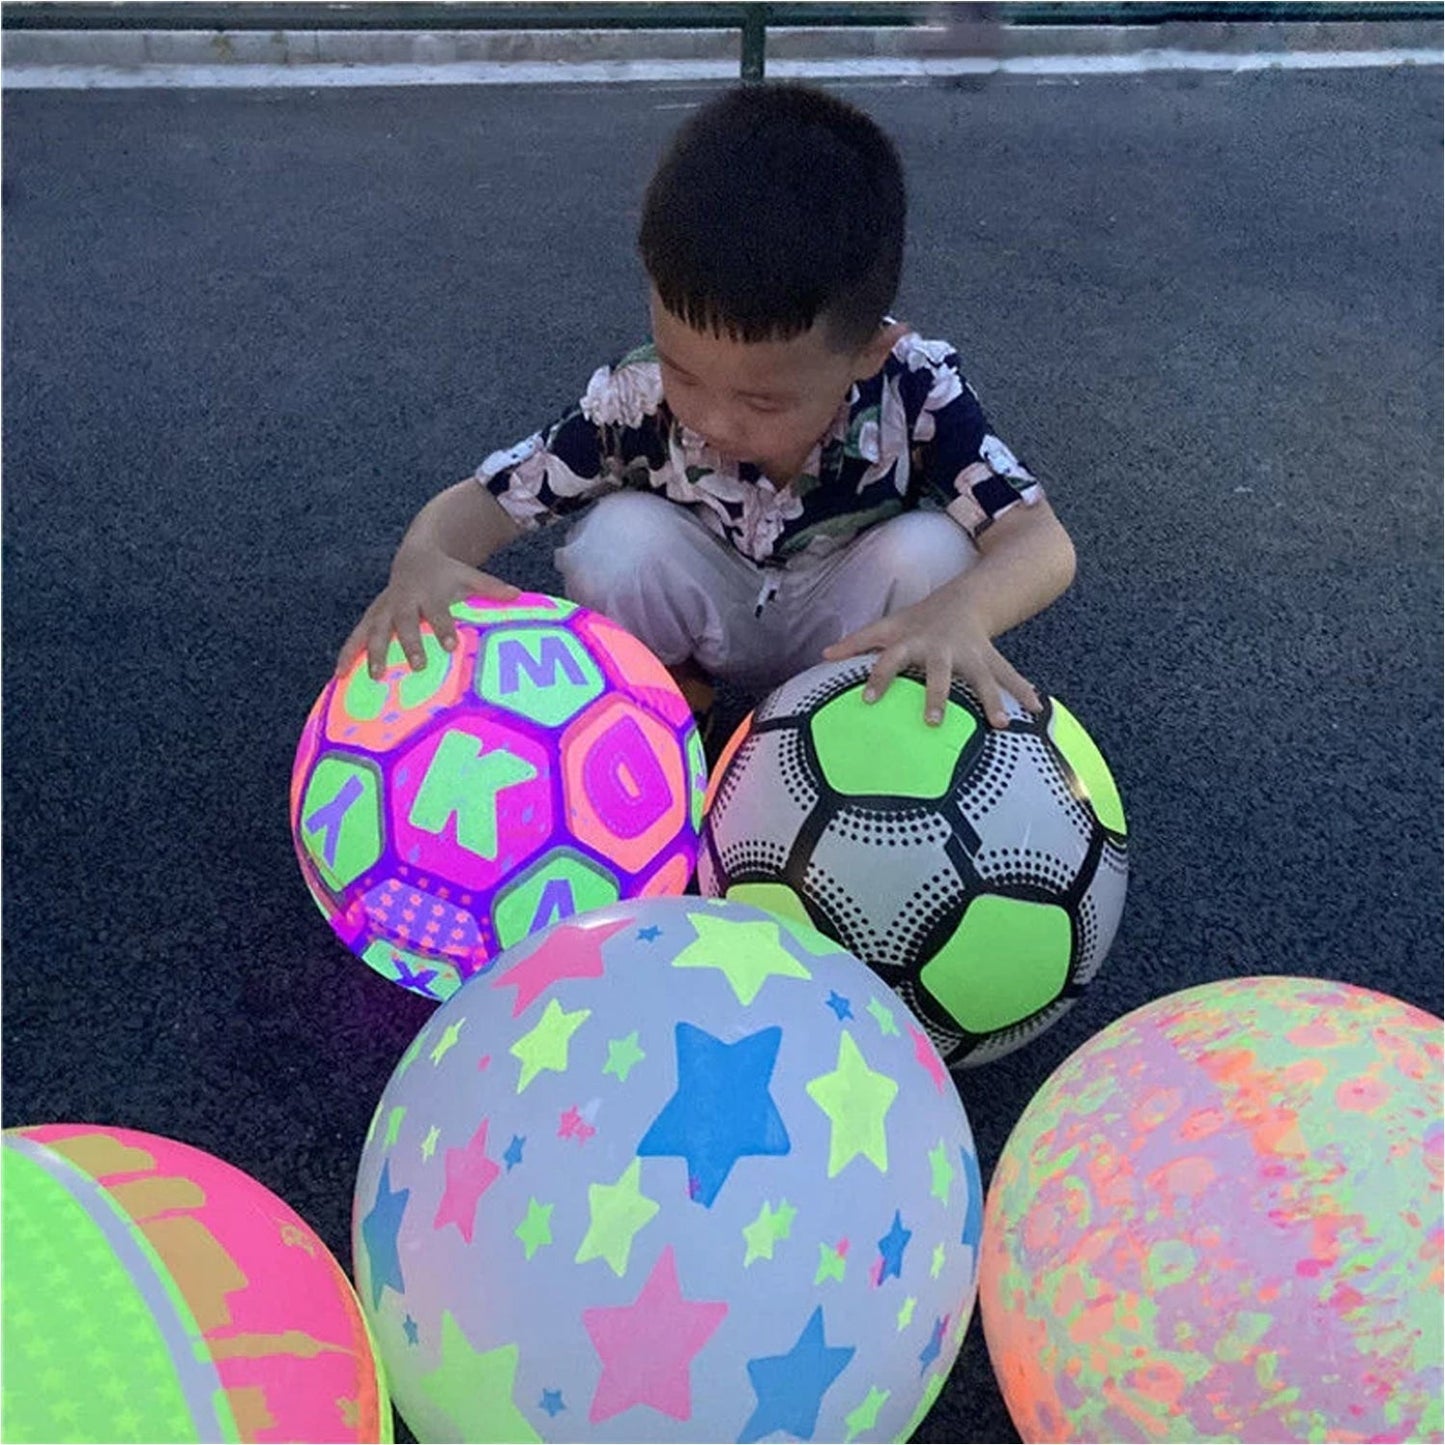 8056 Bouncy Stress Reliever Fun Play Led Rubber Balls for Kids (1Pc Only) DeoDap